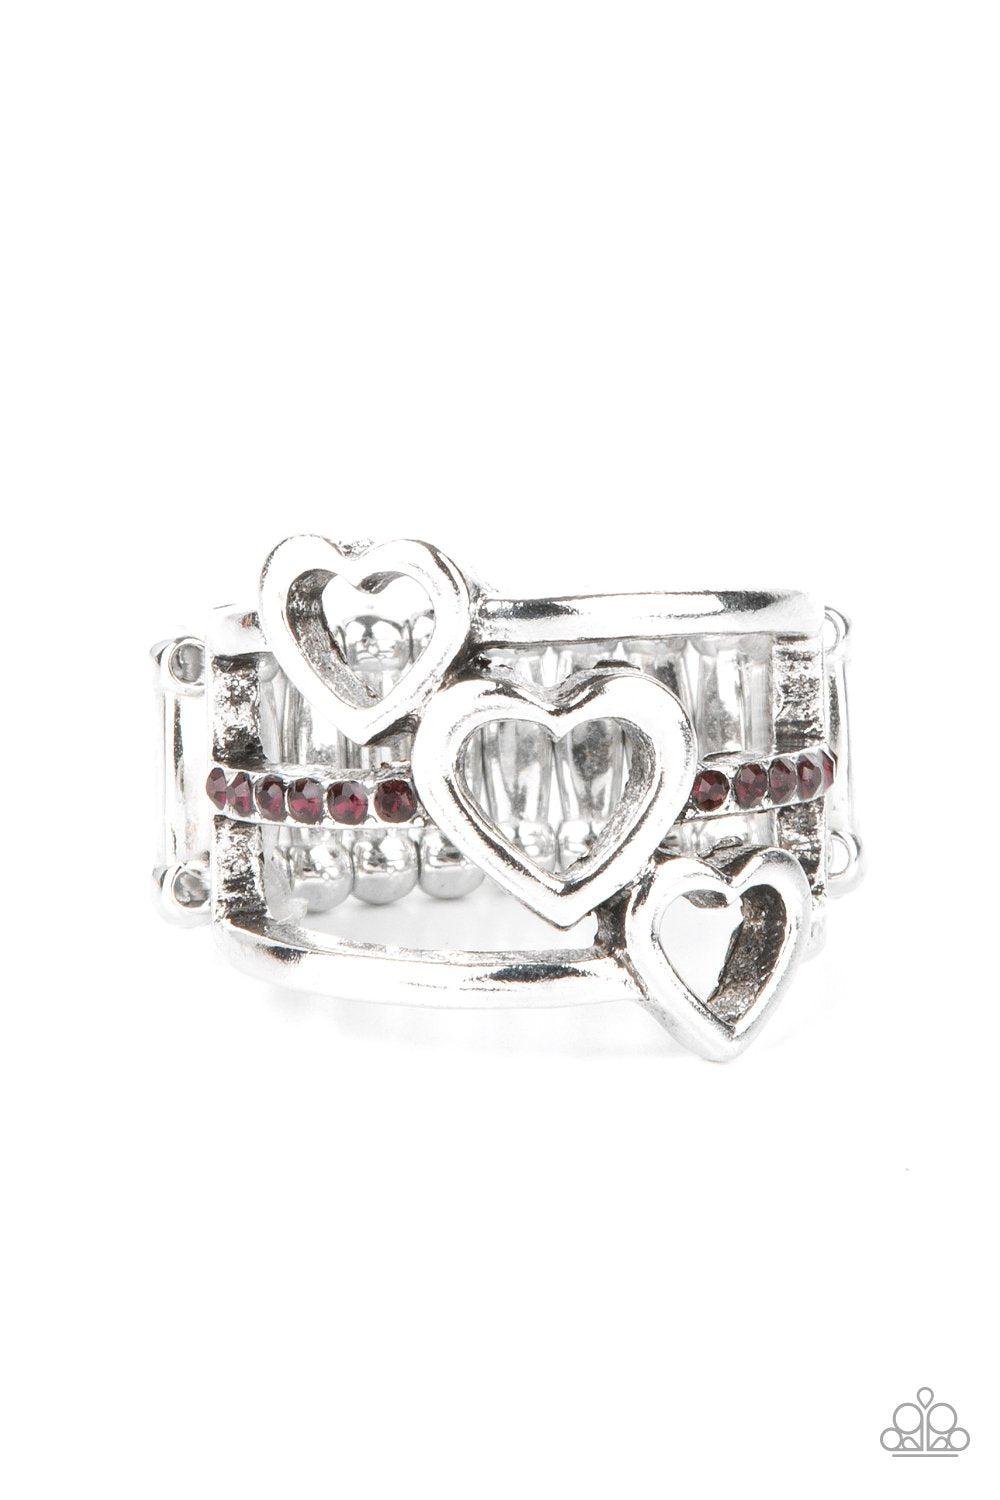 Give Me AMOR Purple Rhinestone Heart Ring - Paparazzi Accessories- lightbox - CarasShop.com - $5 Jewelry by Cara Jewels